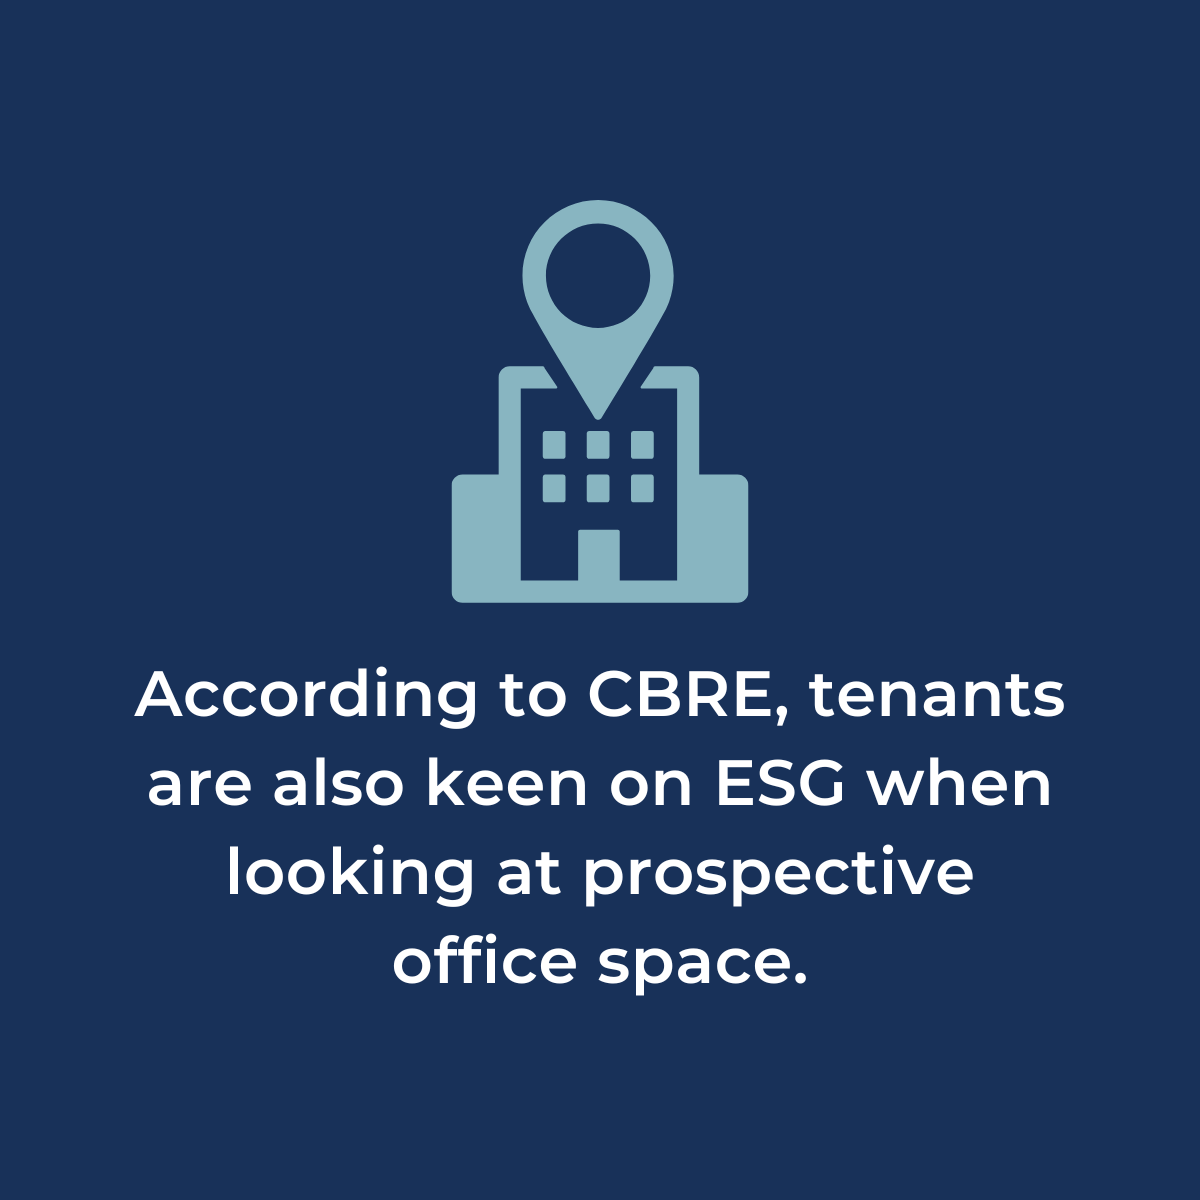 According to CBRE, tenants are also keen on ESG when looking at prospective office space.